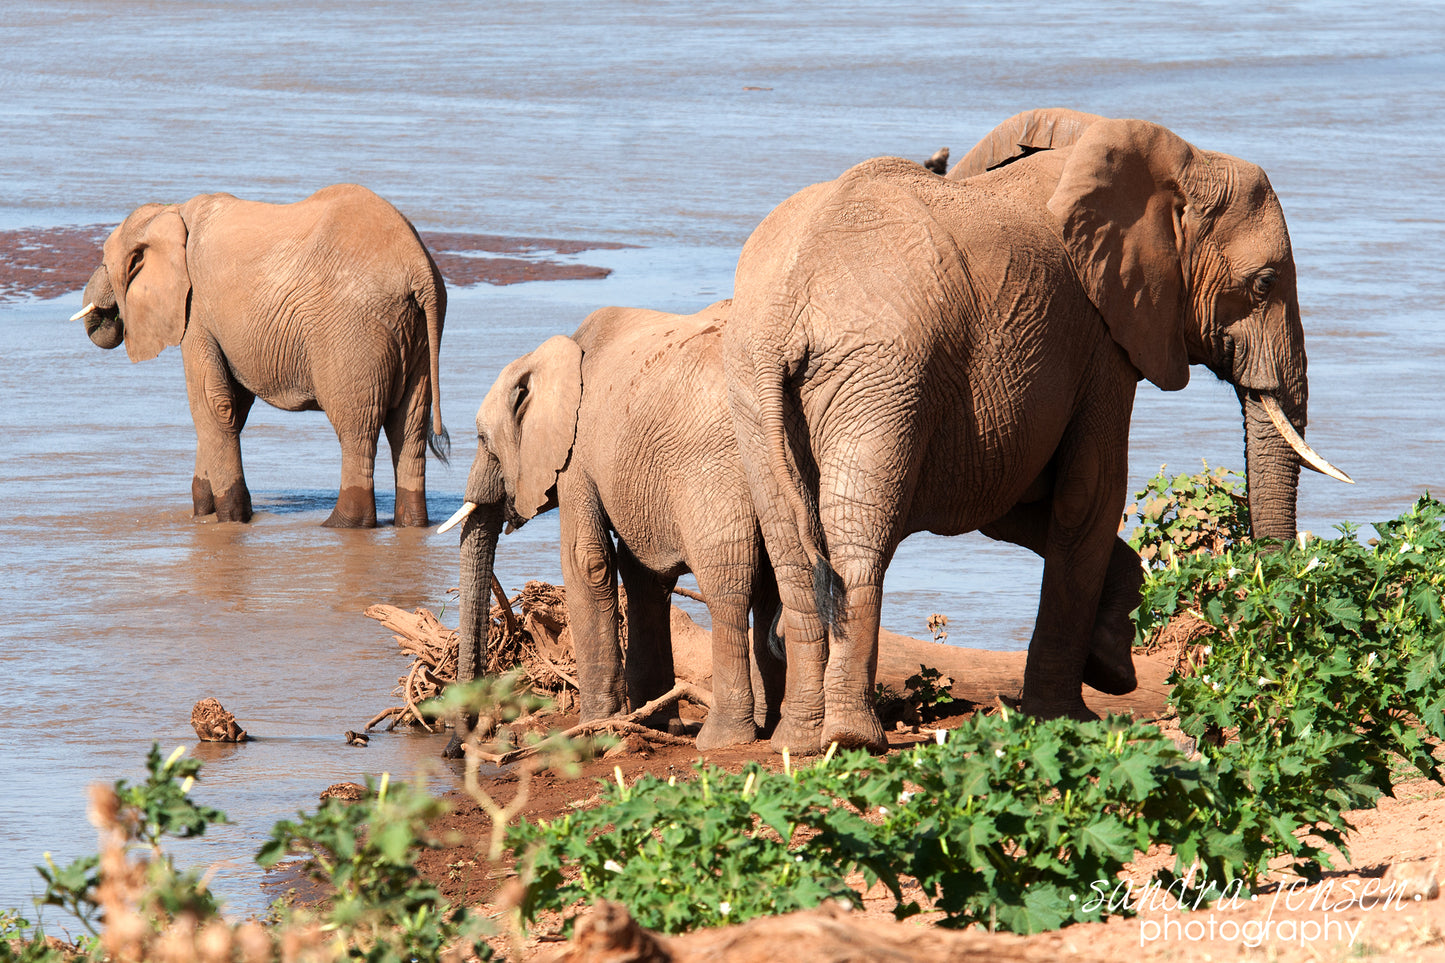 Print - African Elephants at the edge of the River